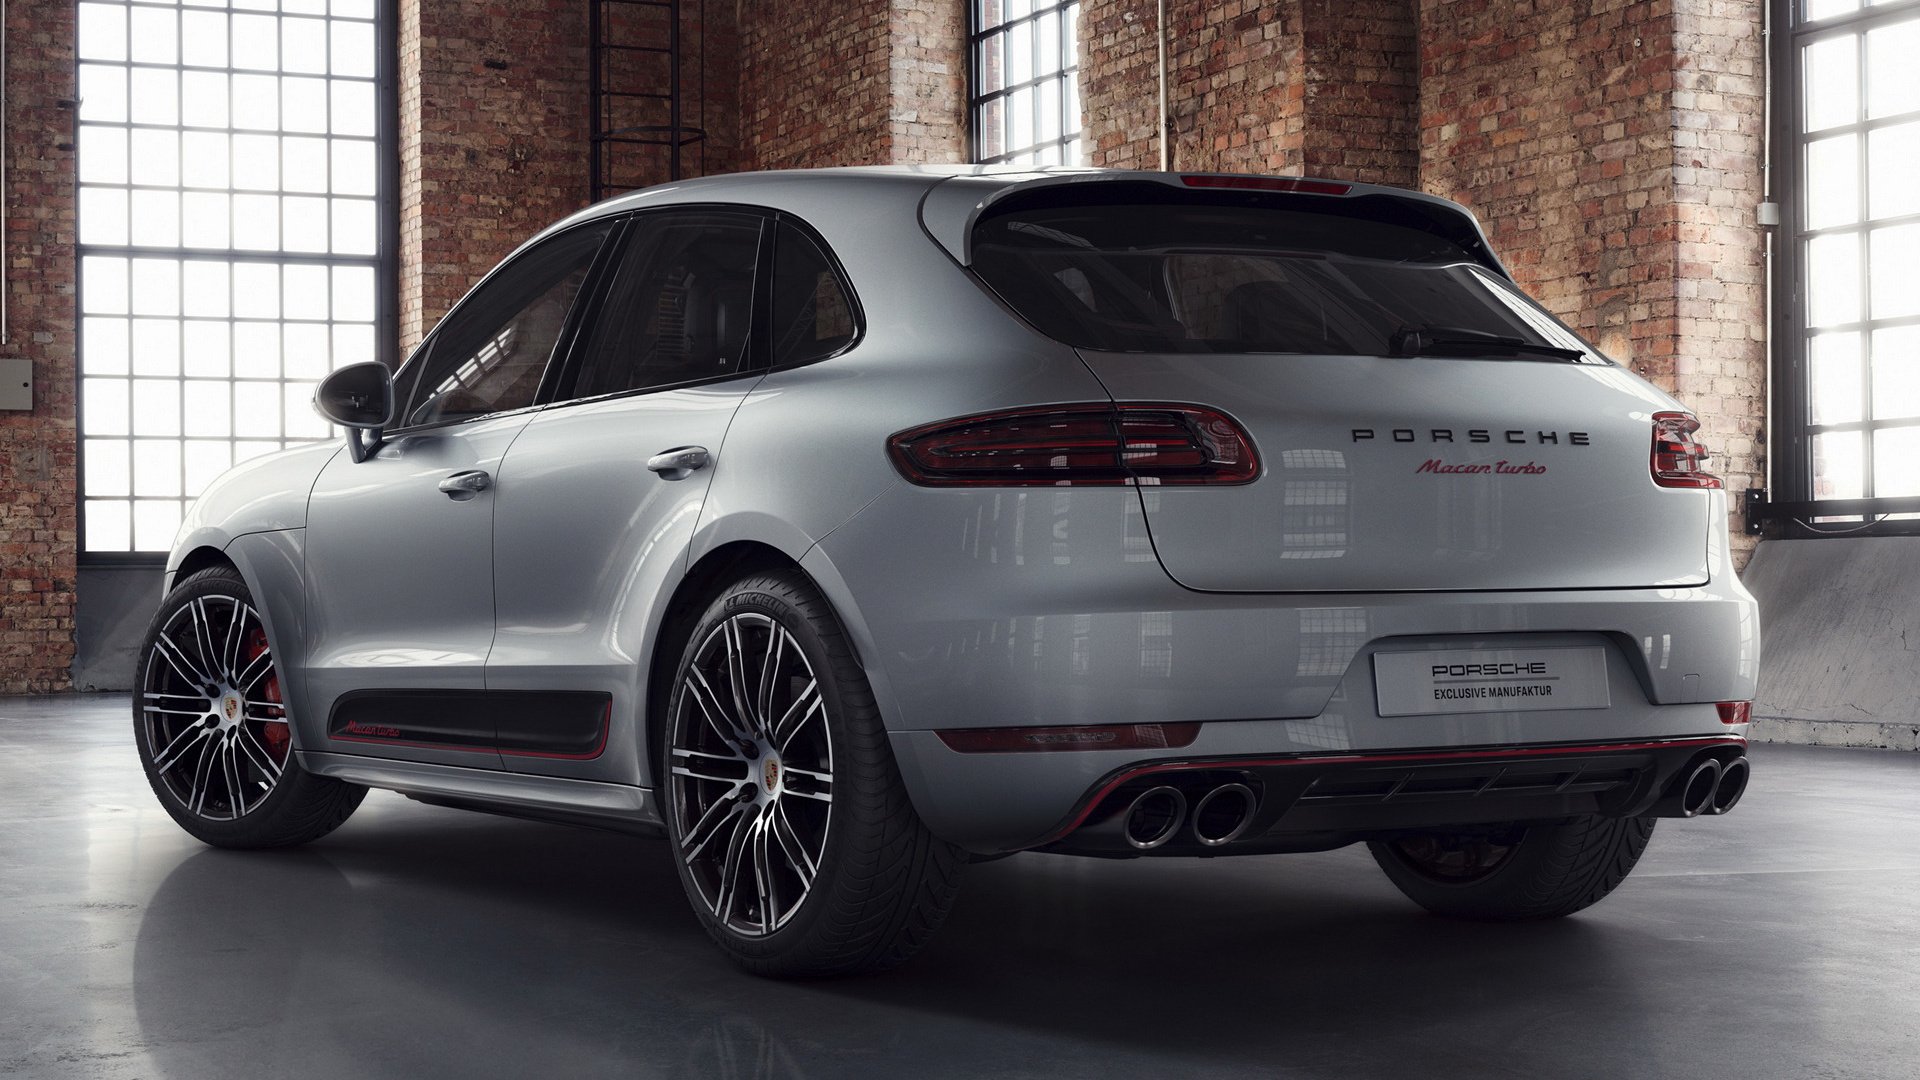 2016 Porsche Macan Turbo Performance Package Hd Wallpaper Background Image 1920x1080